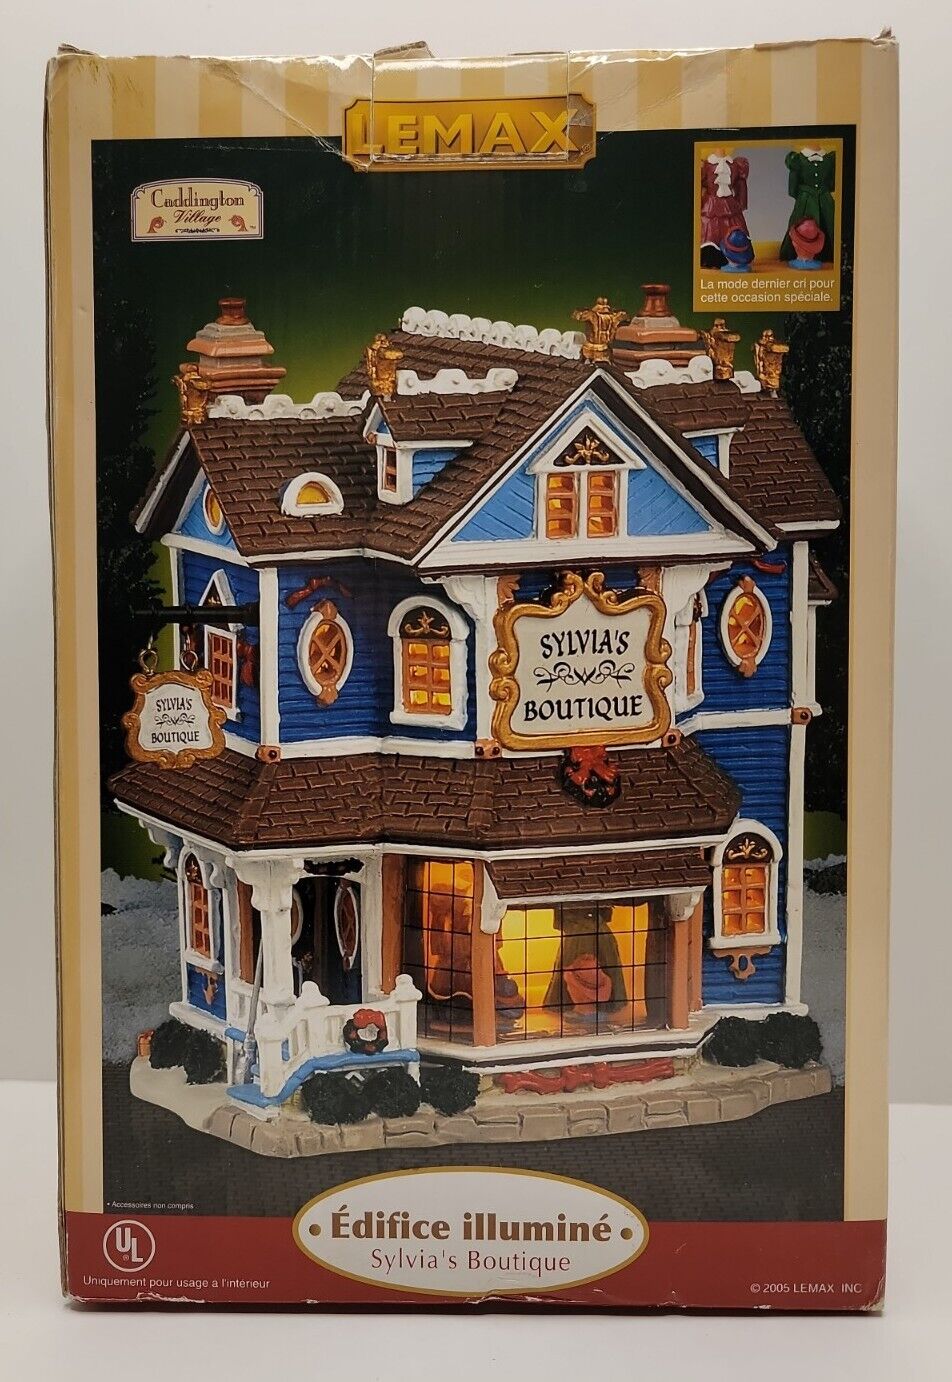 Vintage Lemax Sylvia's Boutique Lighted Building Christmas Village House.